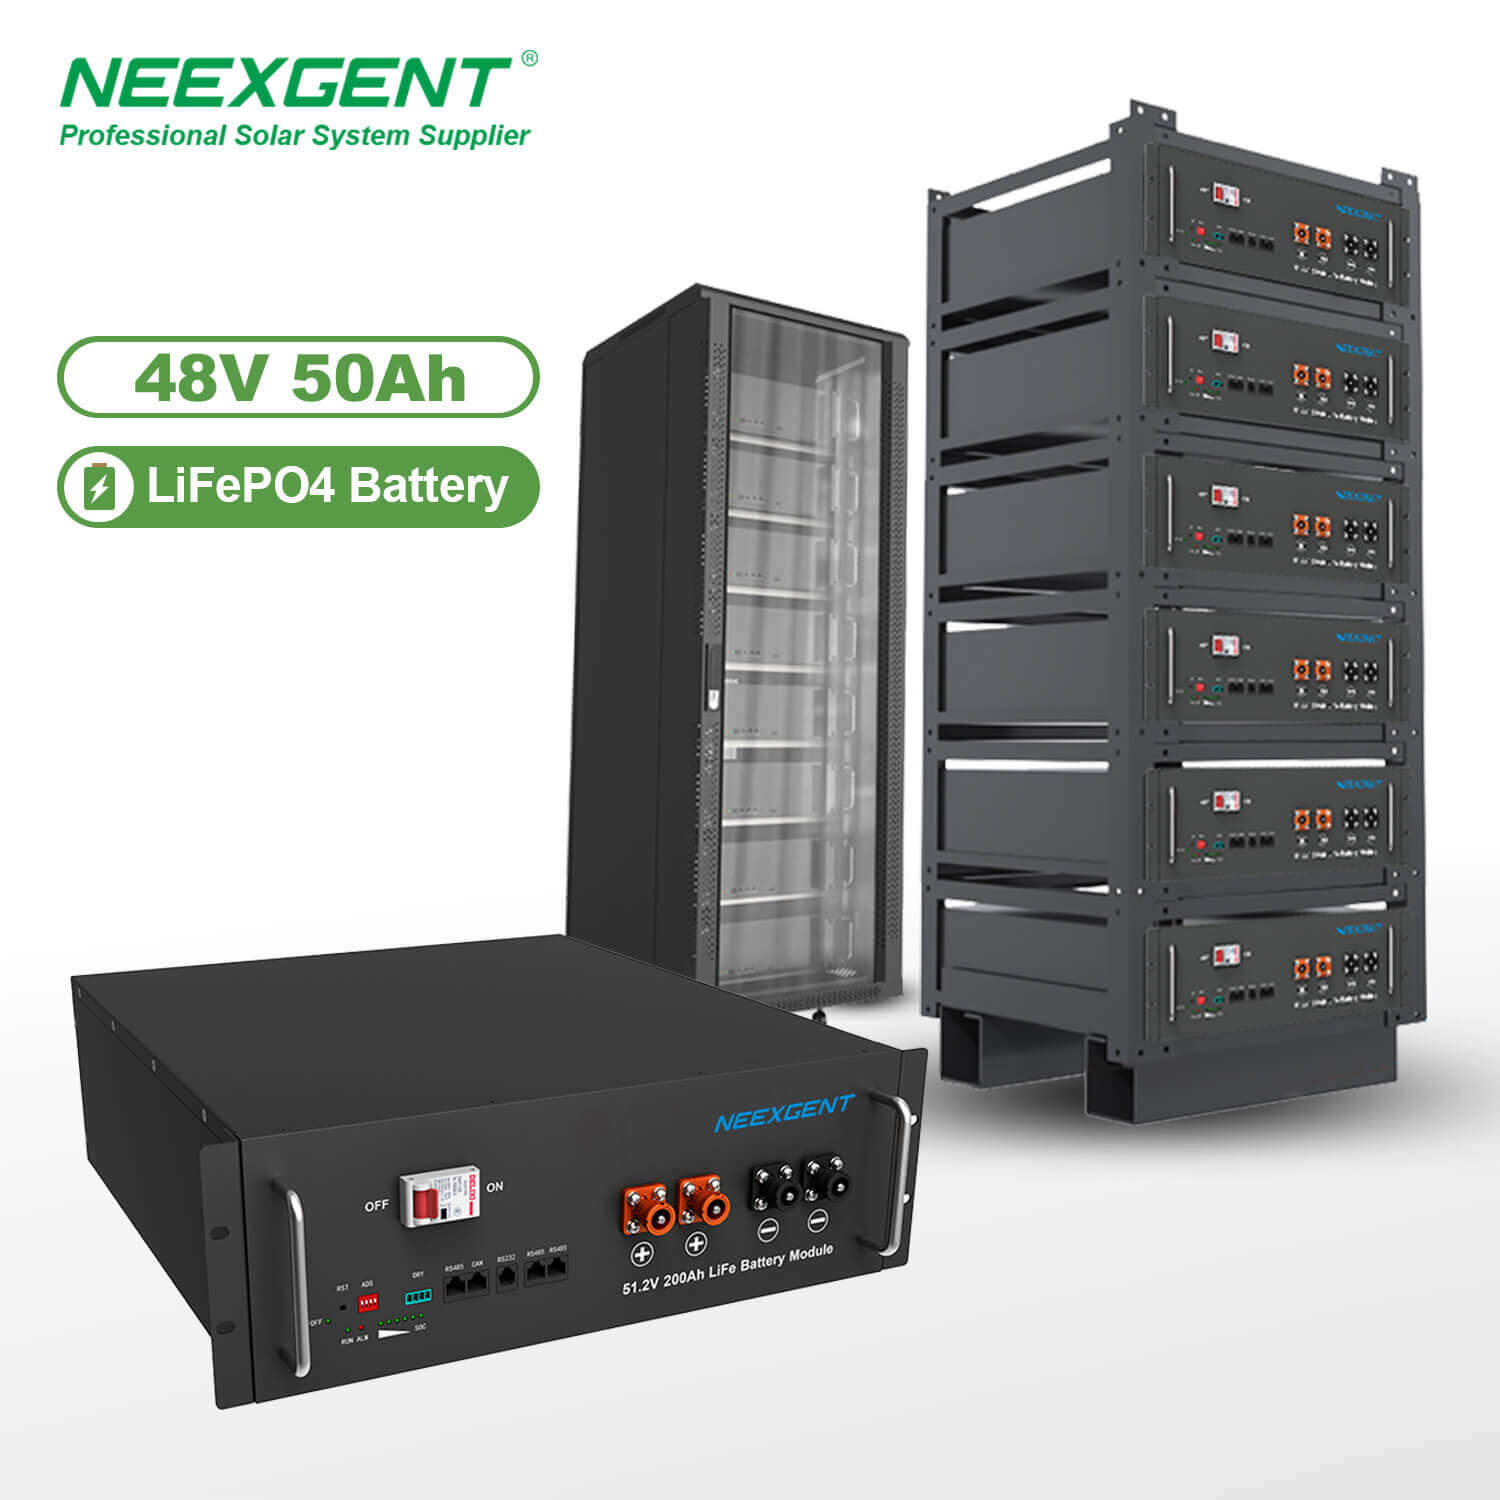 Neexgent Lifepo4 Battery Pack 48v 50ah Lithium Ion Battery For UPS/backup Power/solar Energy Storage